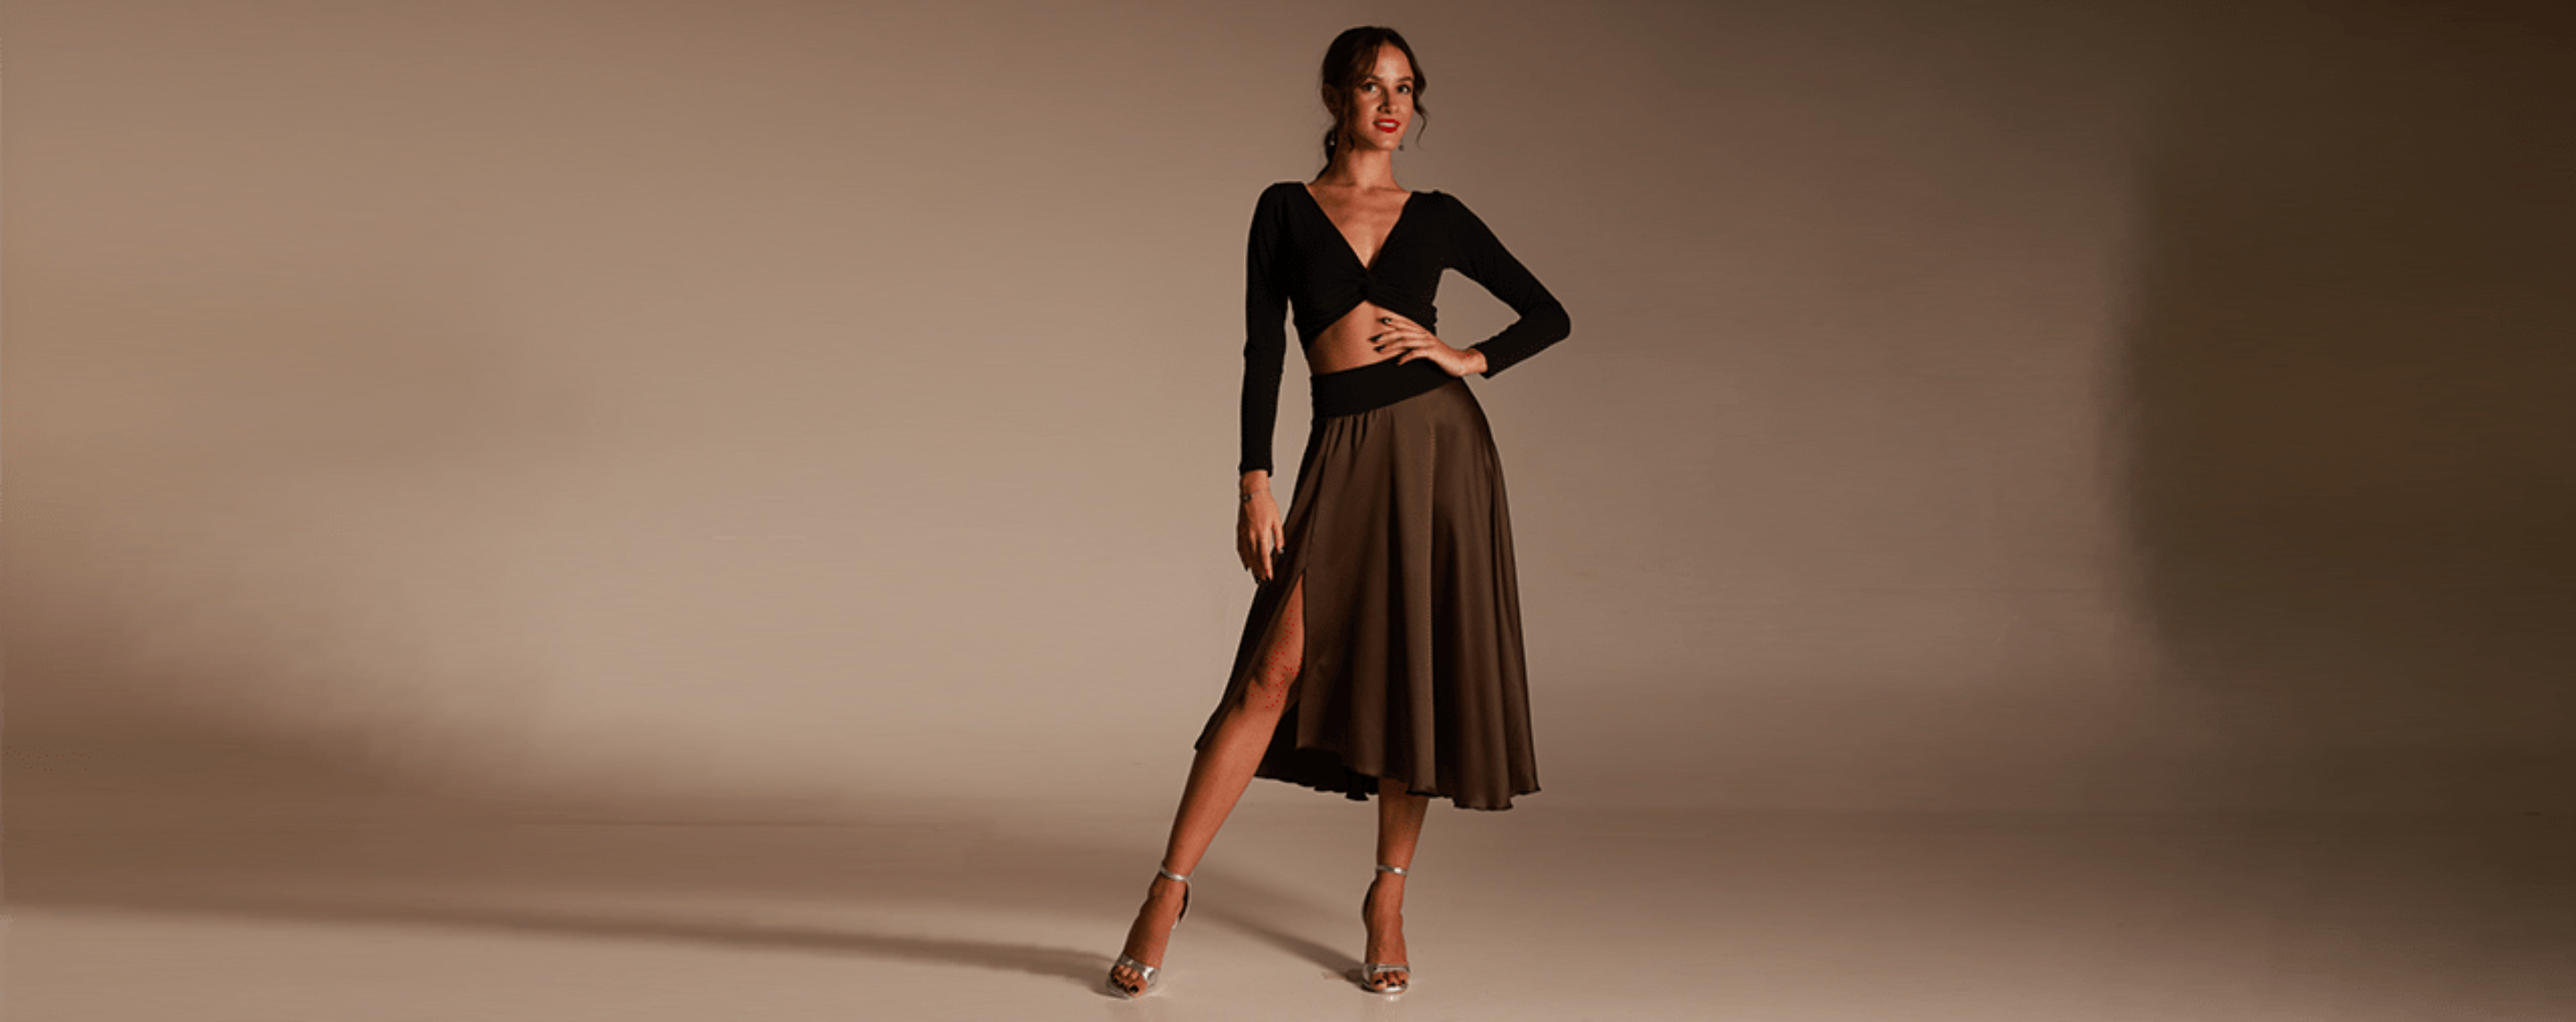 Fishtail Tango Skirt by conDiva | Argentine Tango Clothes